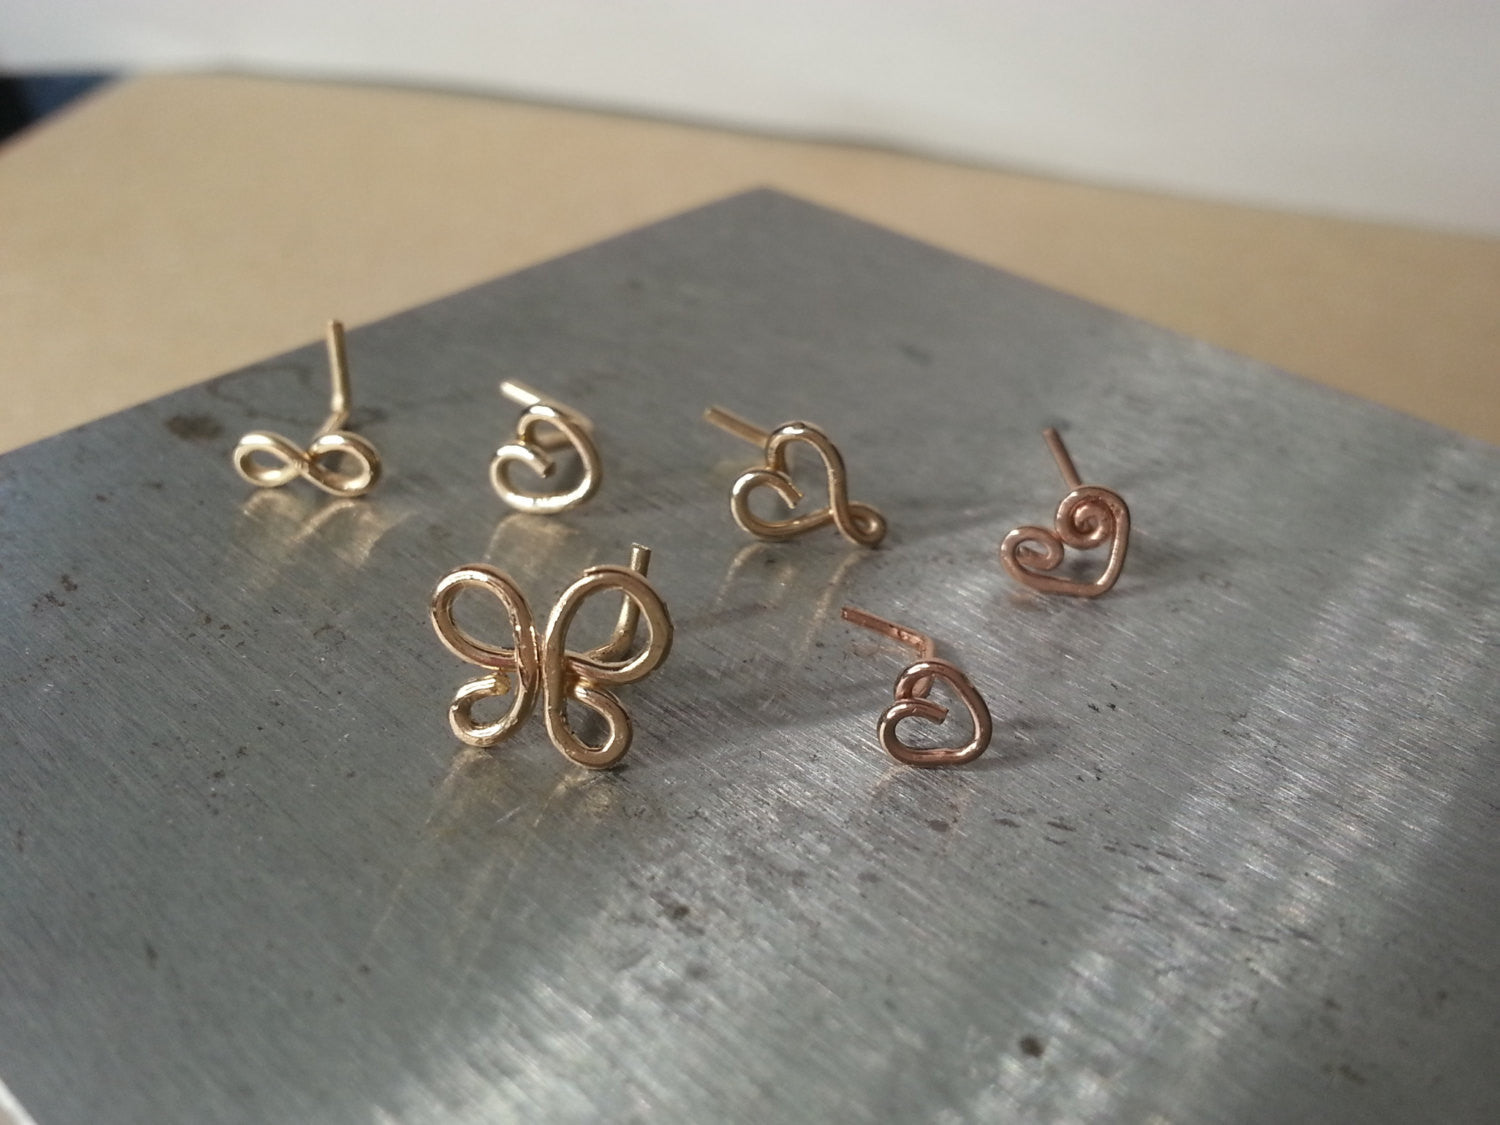 Nose Stud VARIETY BUTTERFLY Endless Cartilage 20 gauge 20ga 14k Yellow, White, Pink Rose Solid / Gold Filled / Silver Earring Helix Tragus